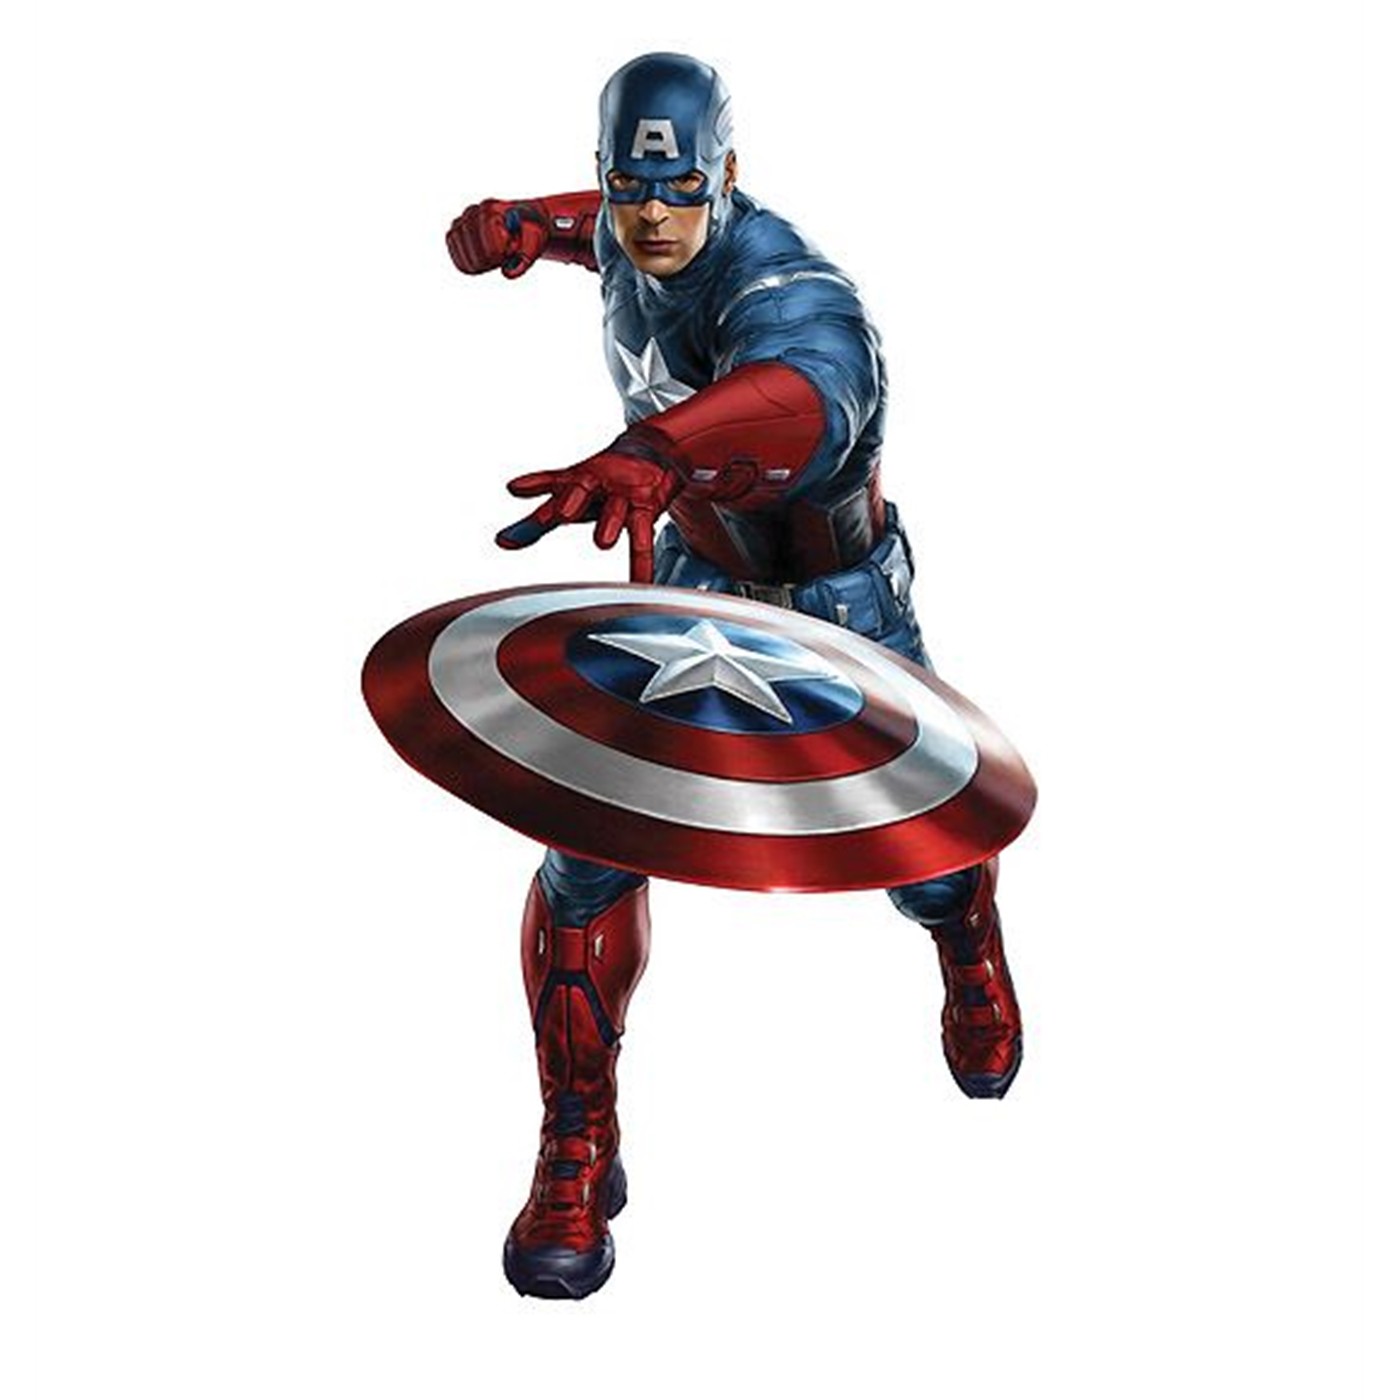 The Avengers Movie Captain America Throwing Cardboard Standup